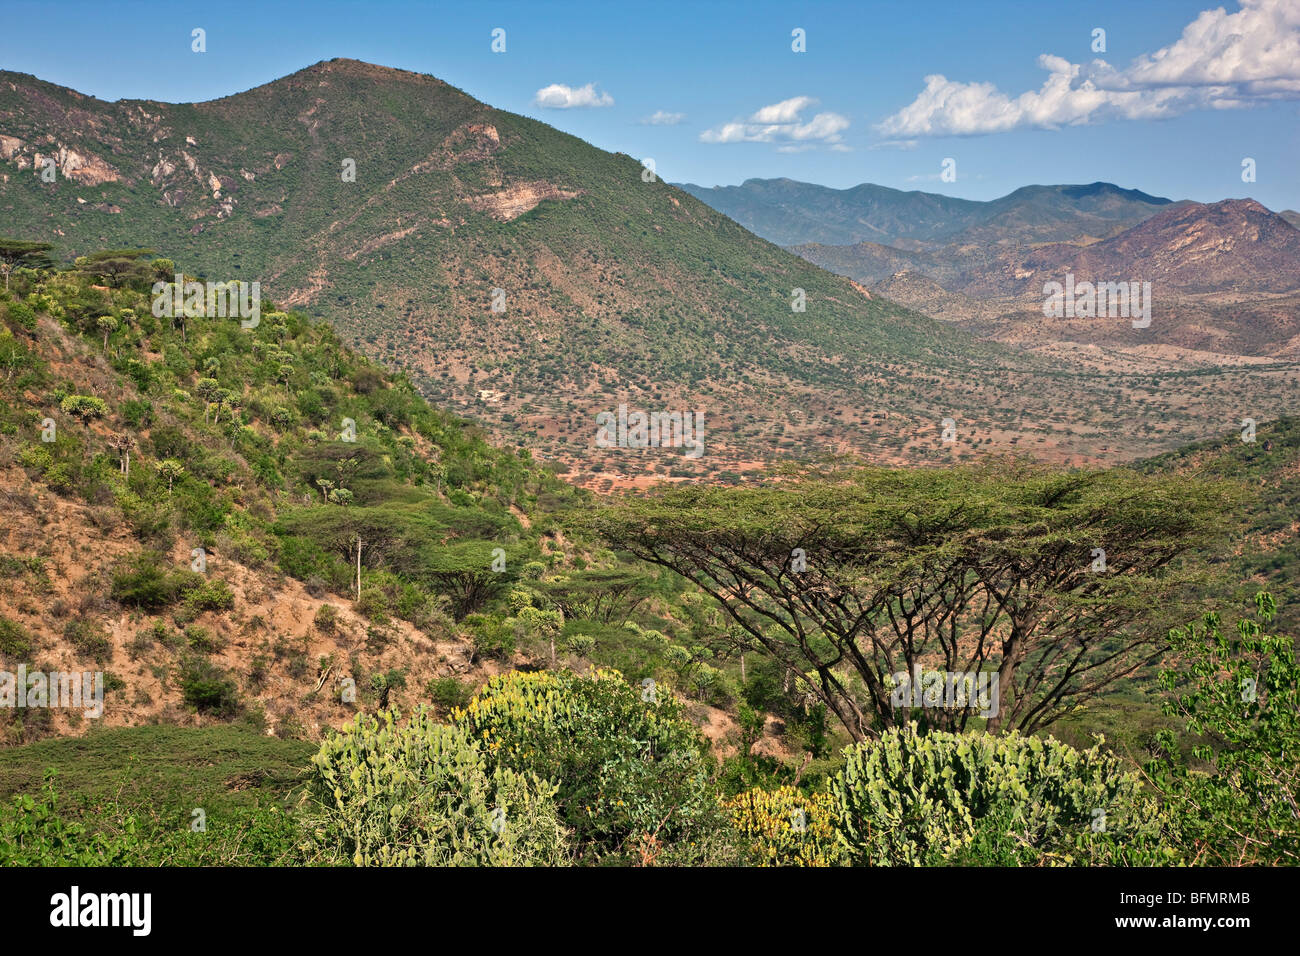 A view of the mountains in the semi-arid bush country from the foothills of Mount Nyiru in north Samburuland. Stock Photo